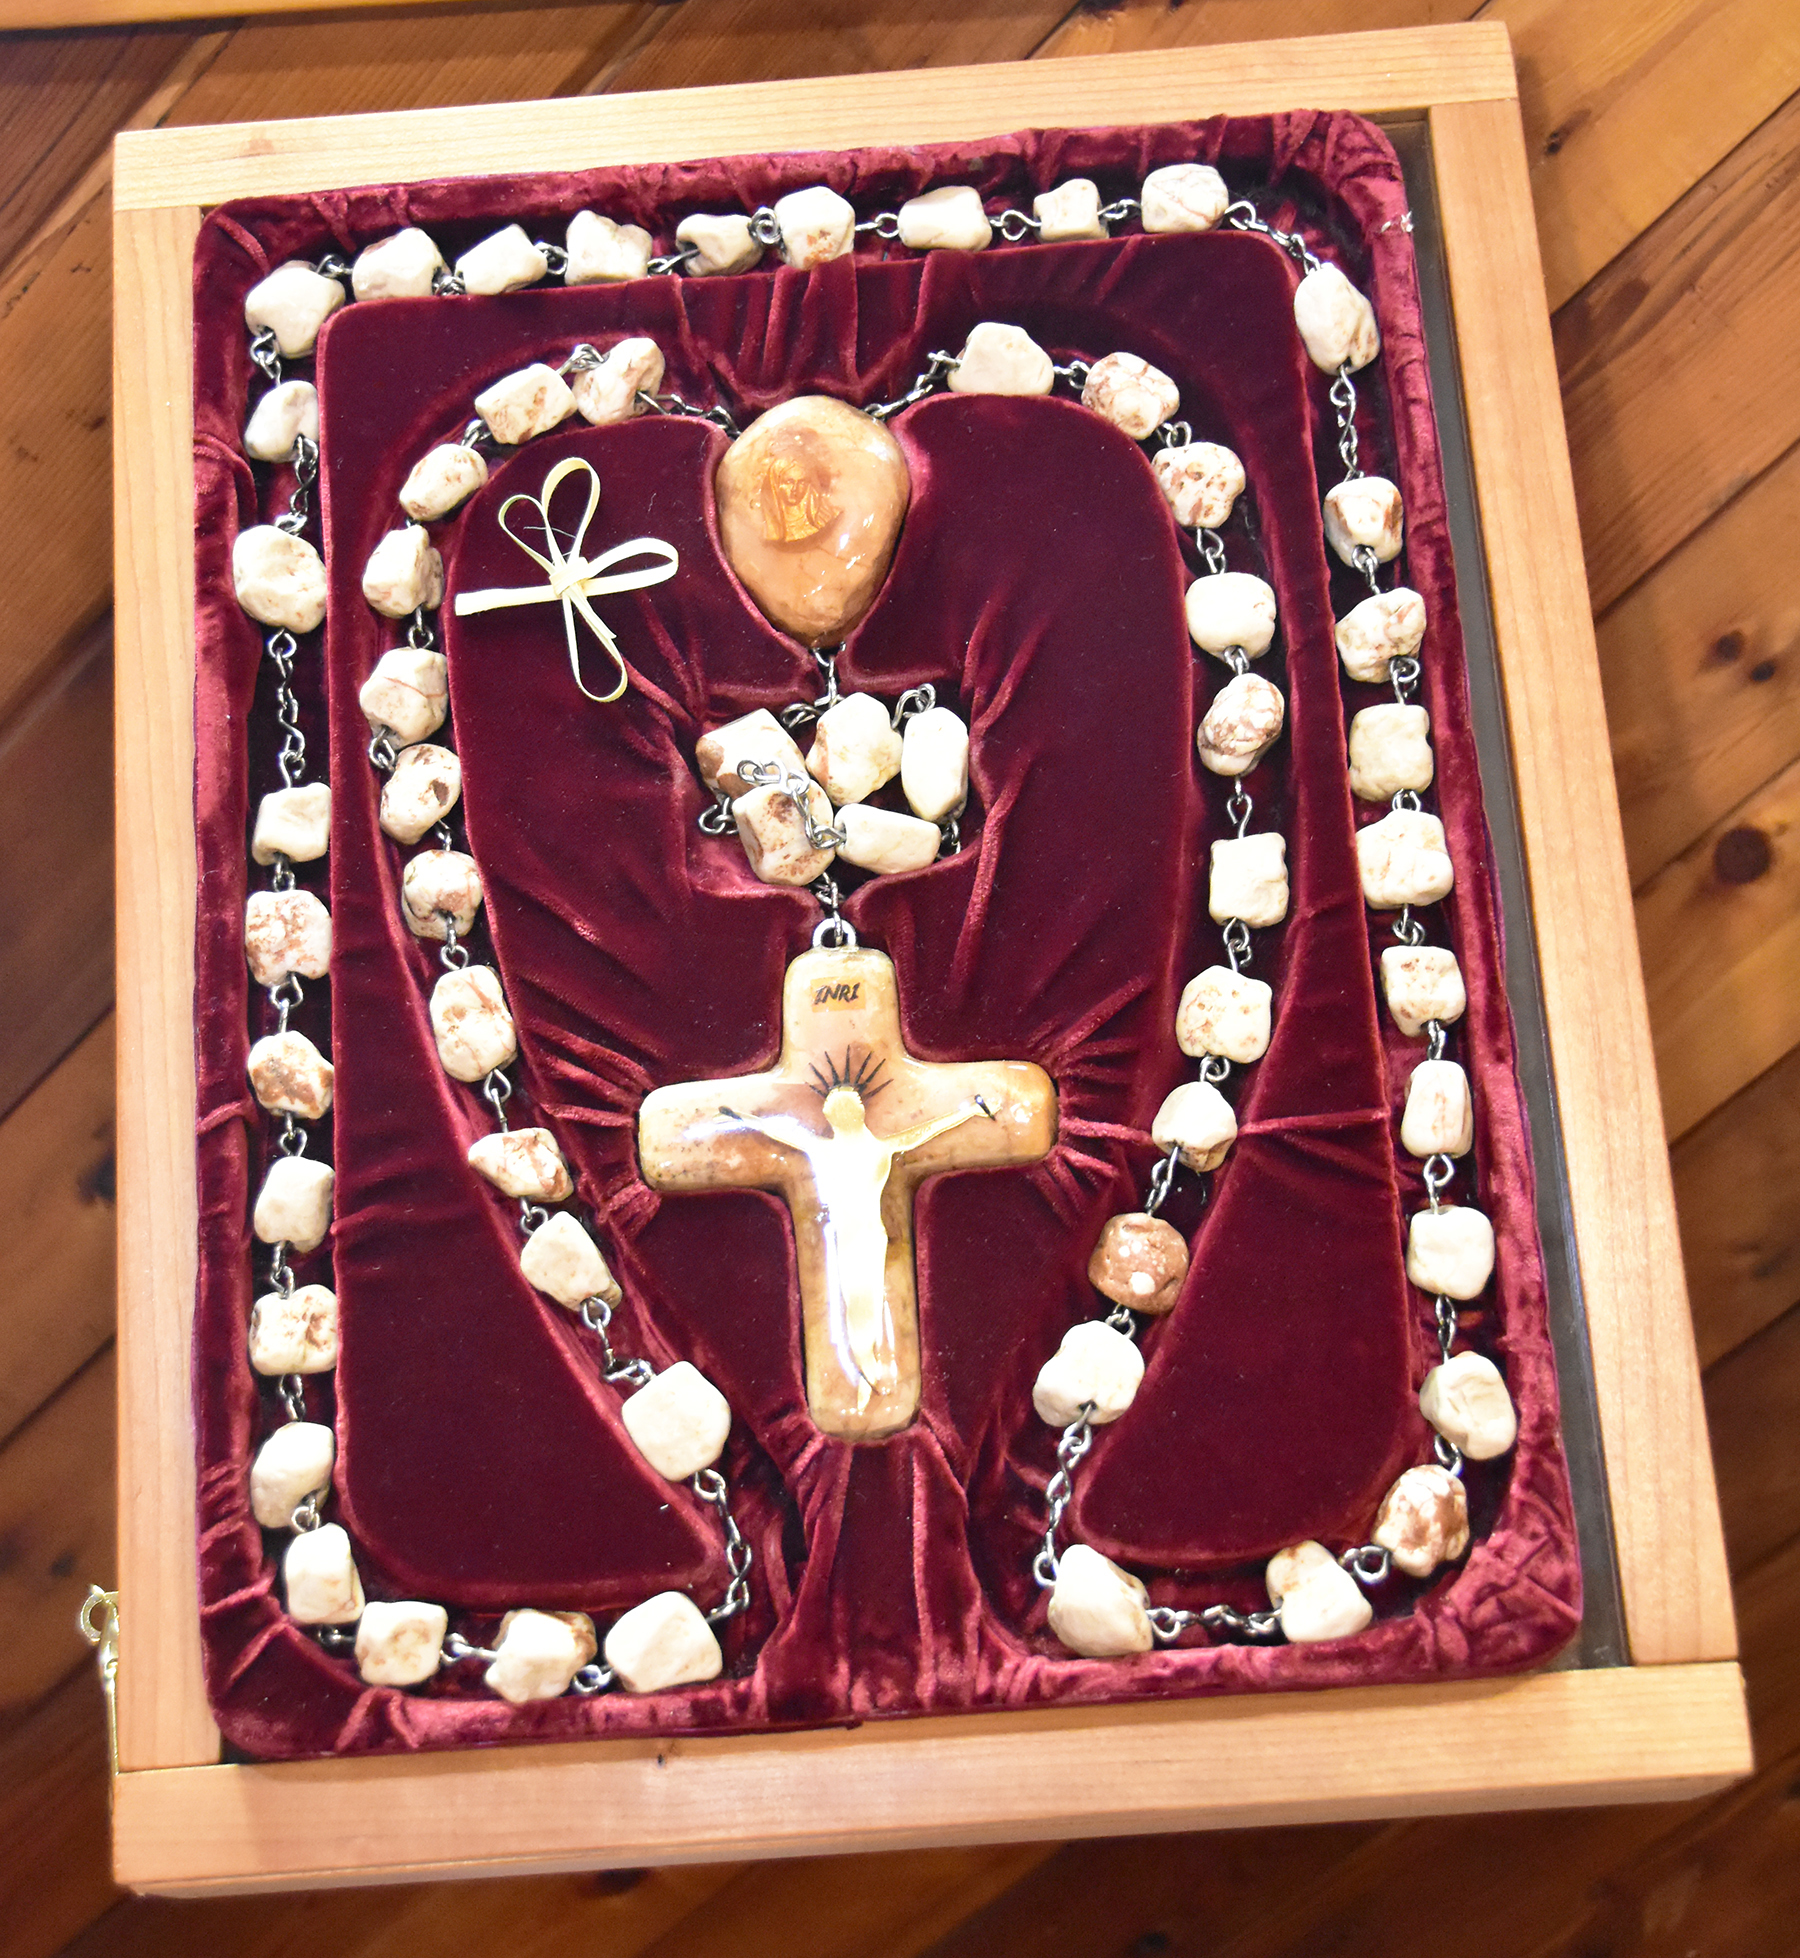 Pilgrim rosary - Marian Center honors Our Lady — ‘that’s what it’s all about’